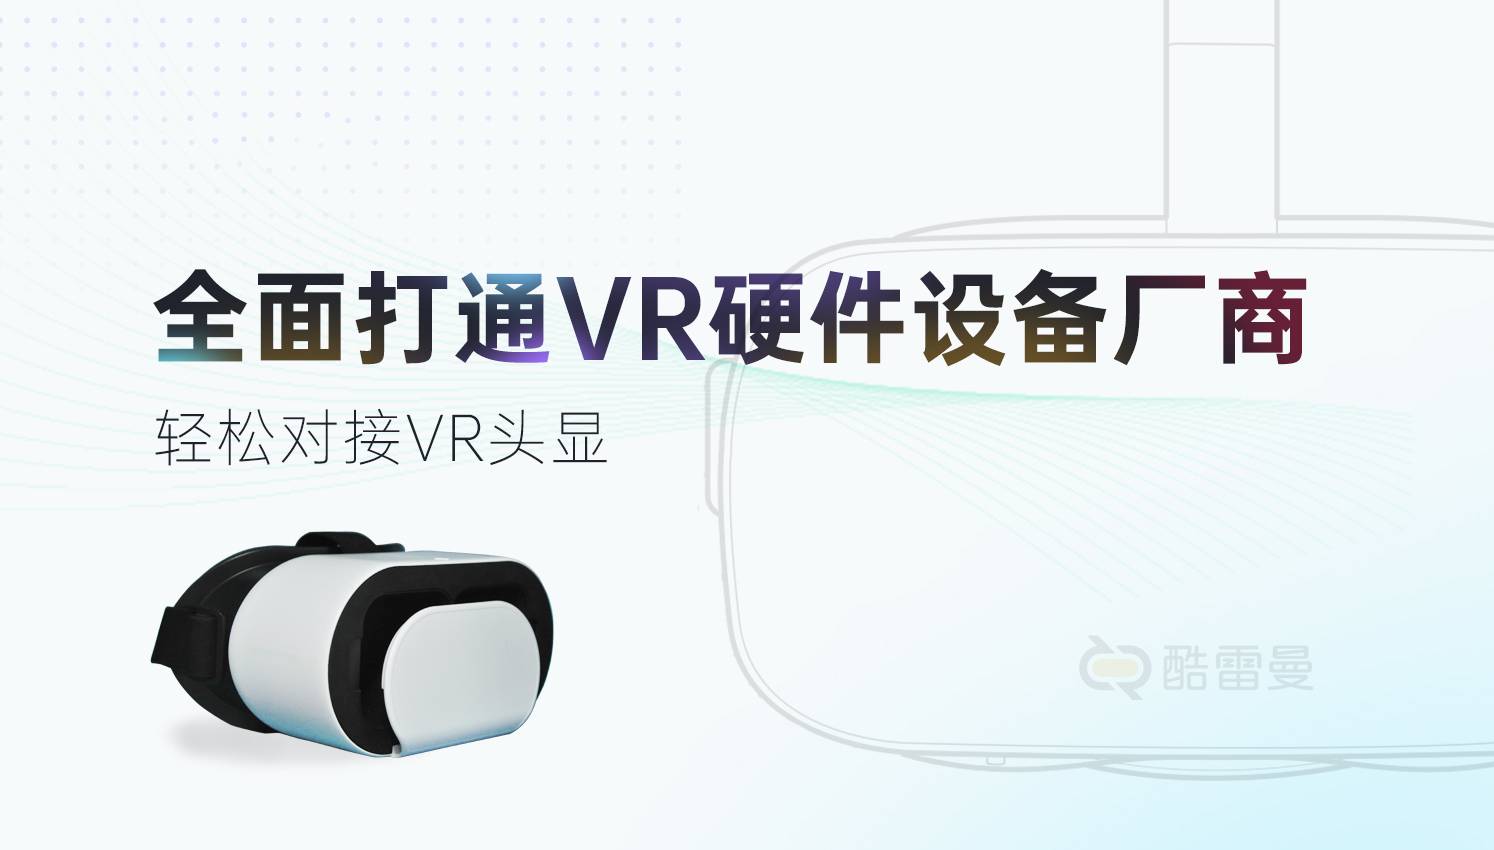 From imagination to productivity, VR panoramic technology brings the Asian Games closer to you